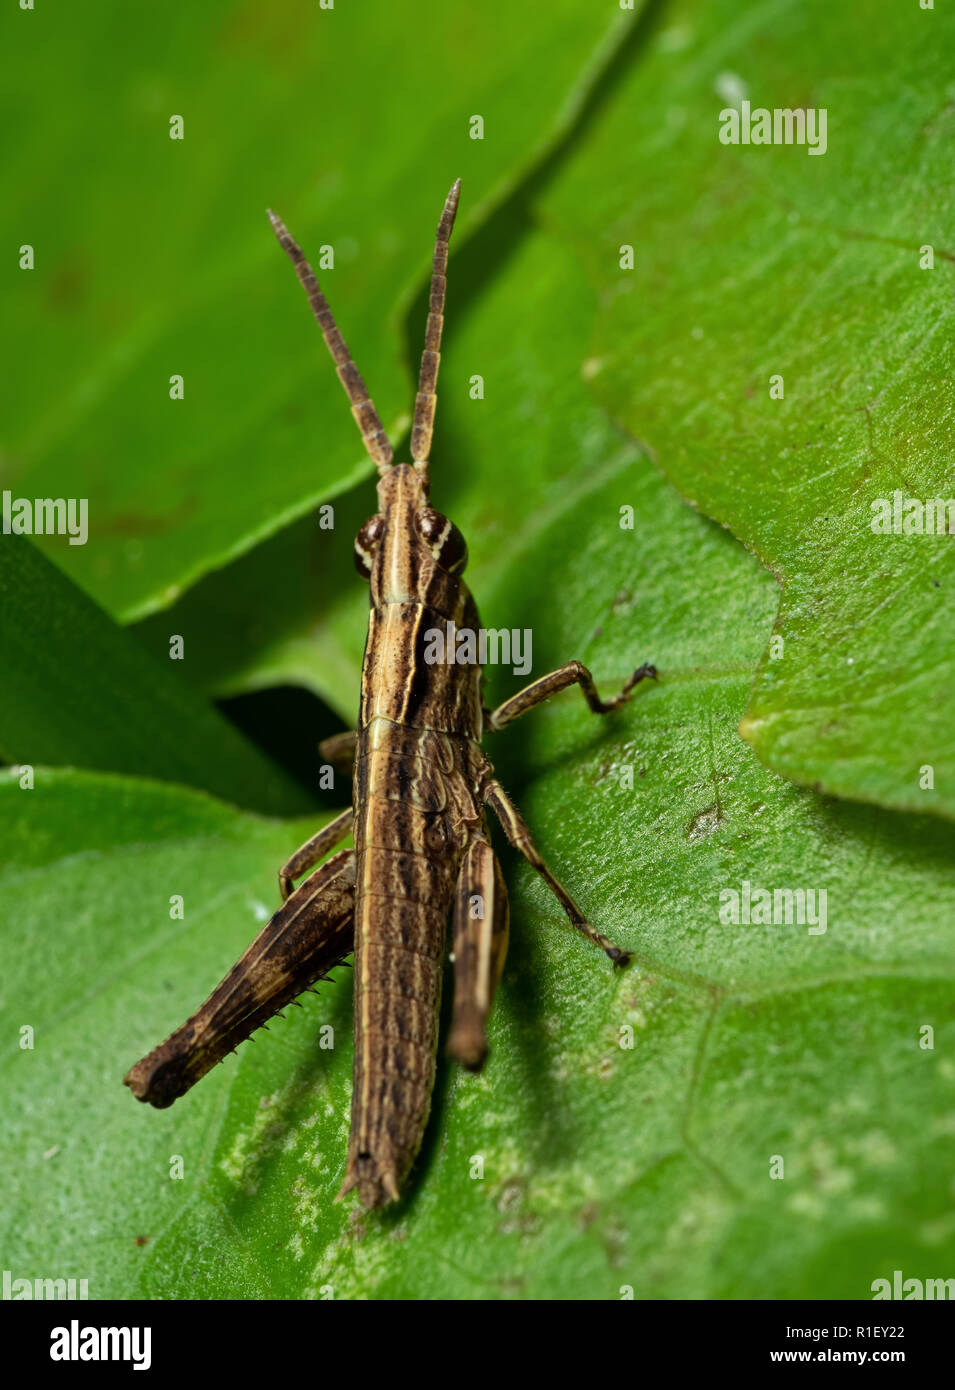 Macro Photography of Grasshopper on Green Leaf Stock Photo